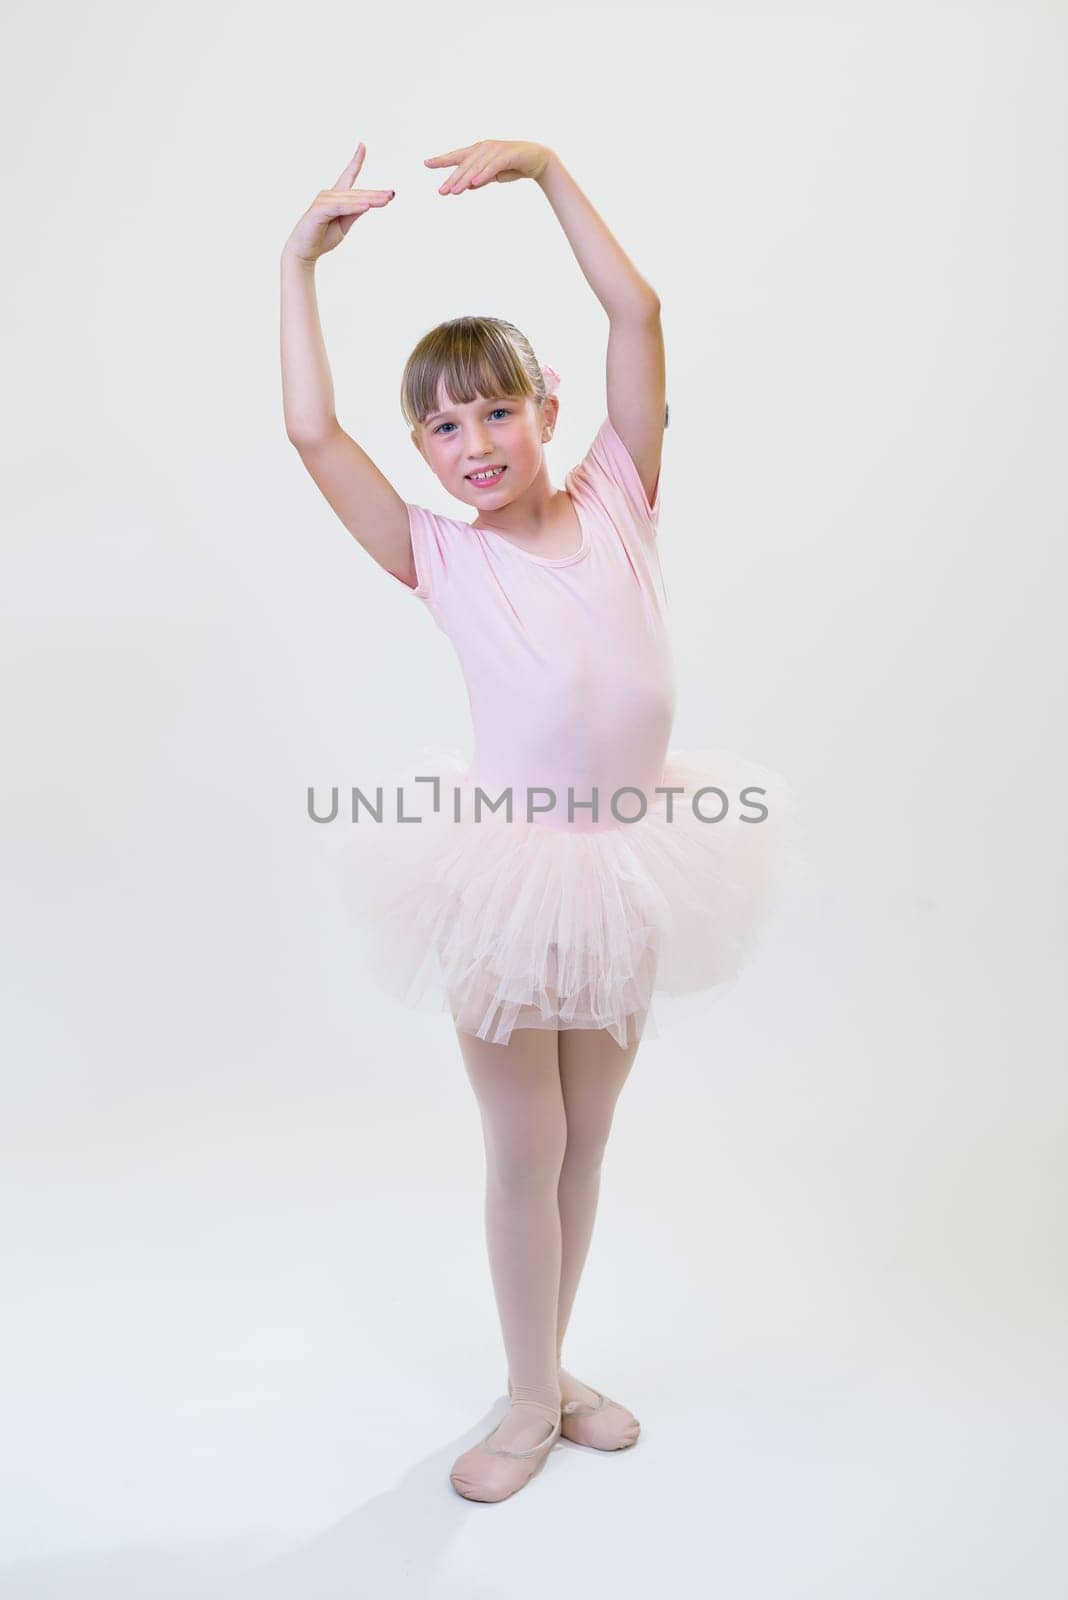 Little ballerina dancer in a pink tutu academy student posing on white background by jcdiazhidalgo